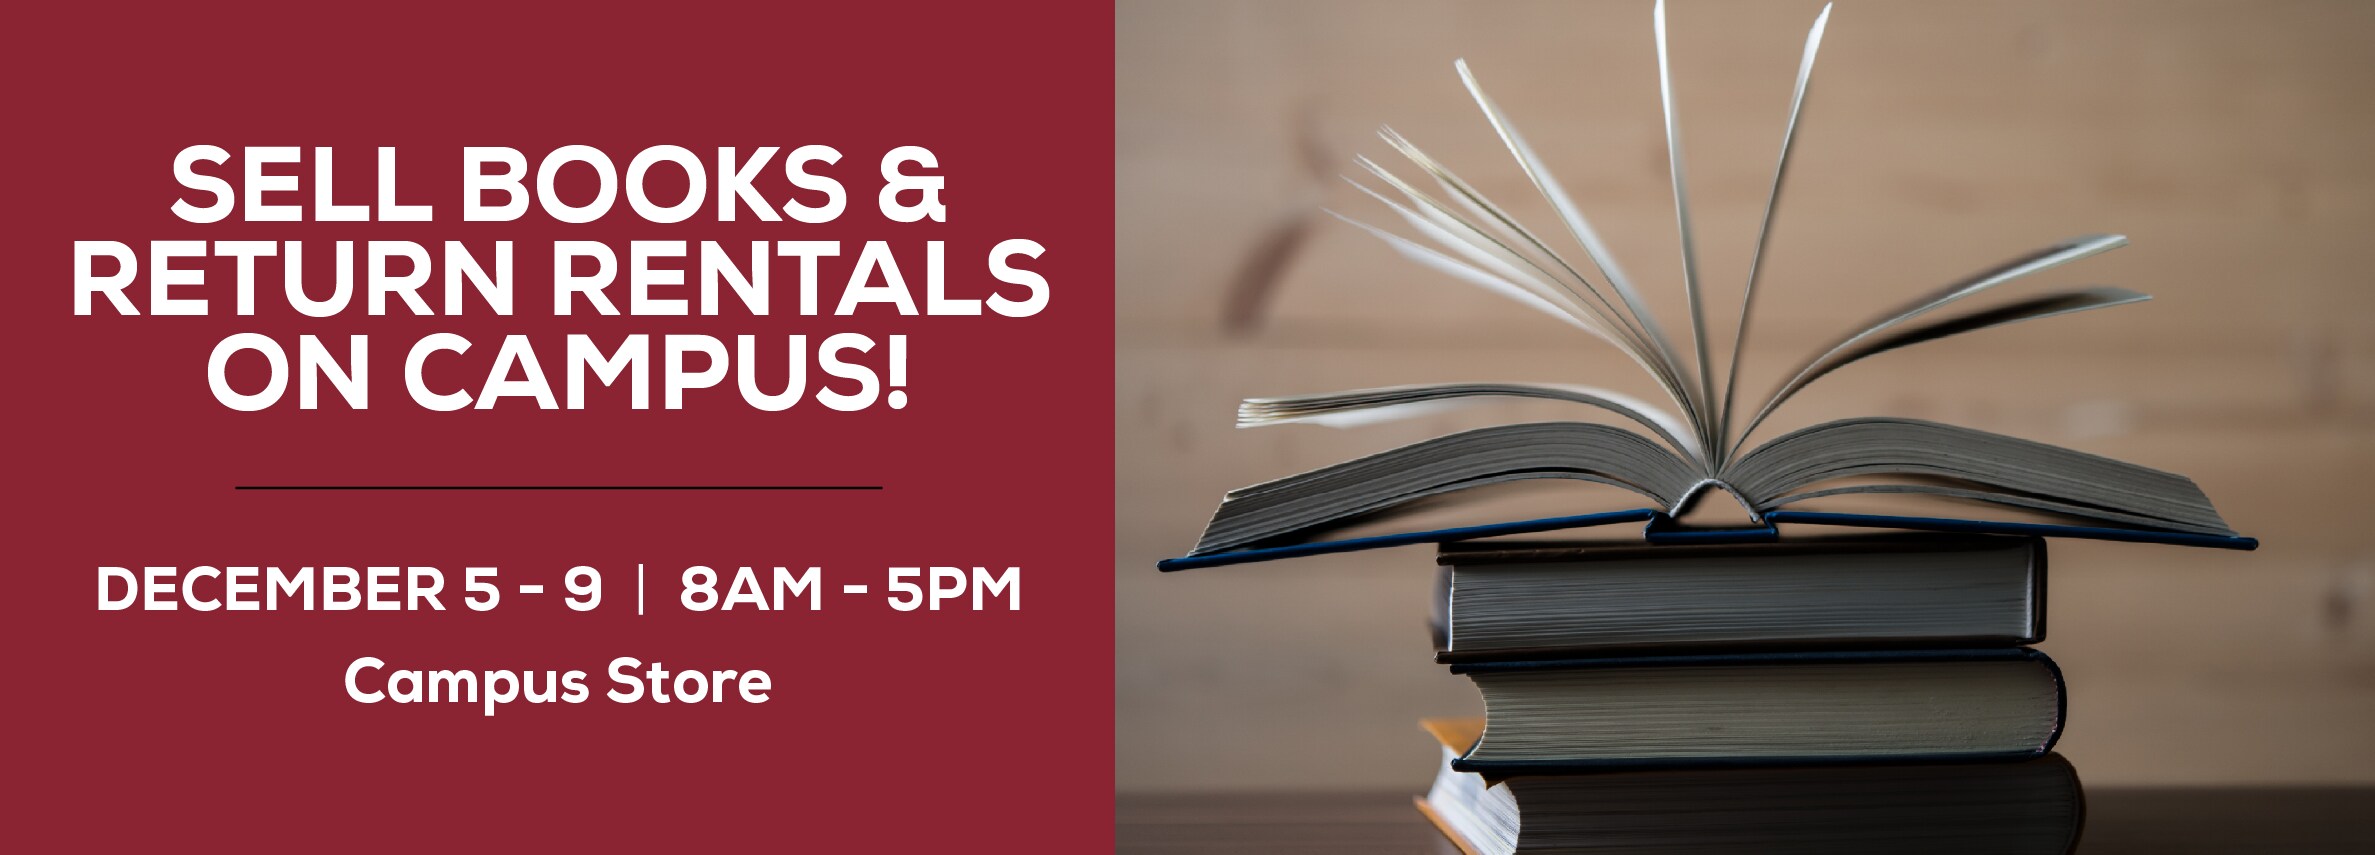 Sell your books and return rentals on campus! December 5th through 9th. 8am to 5pm at the Campus Store